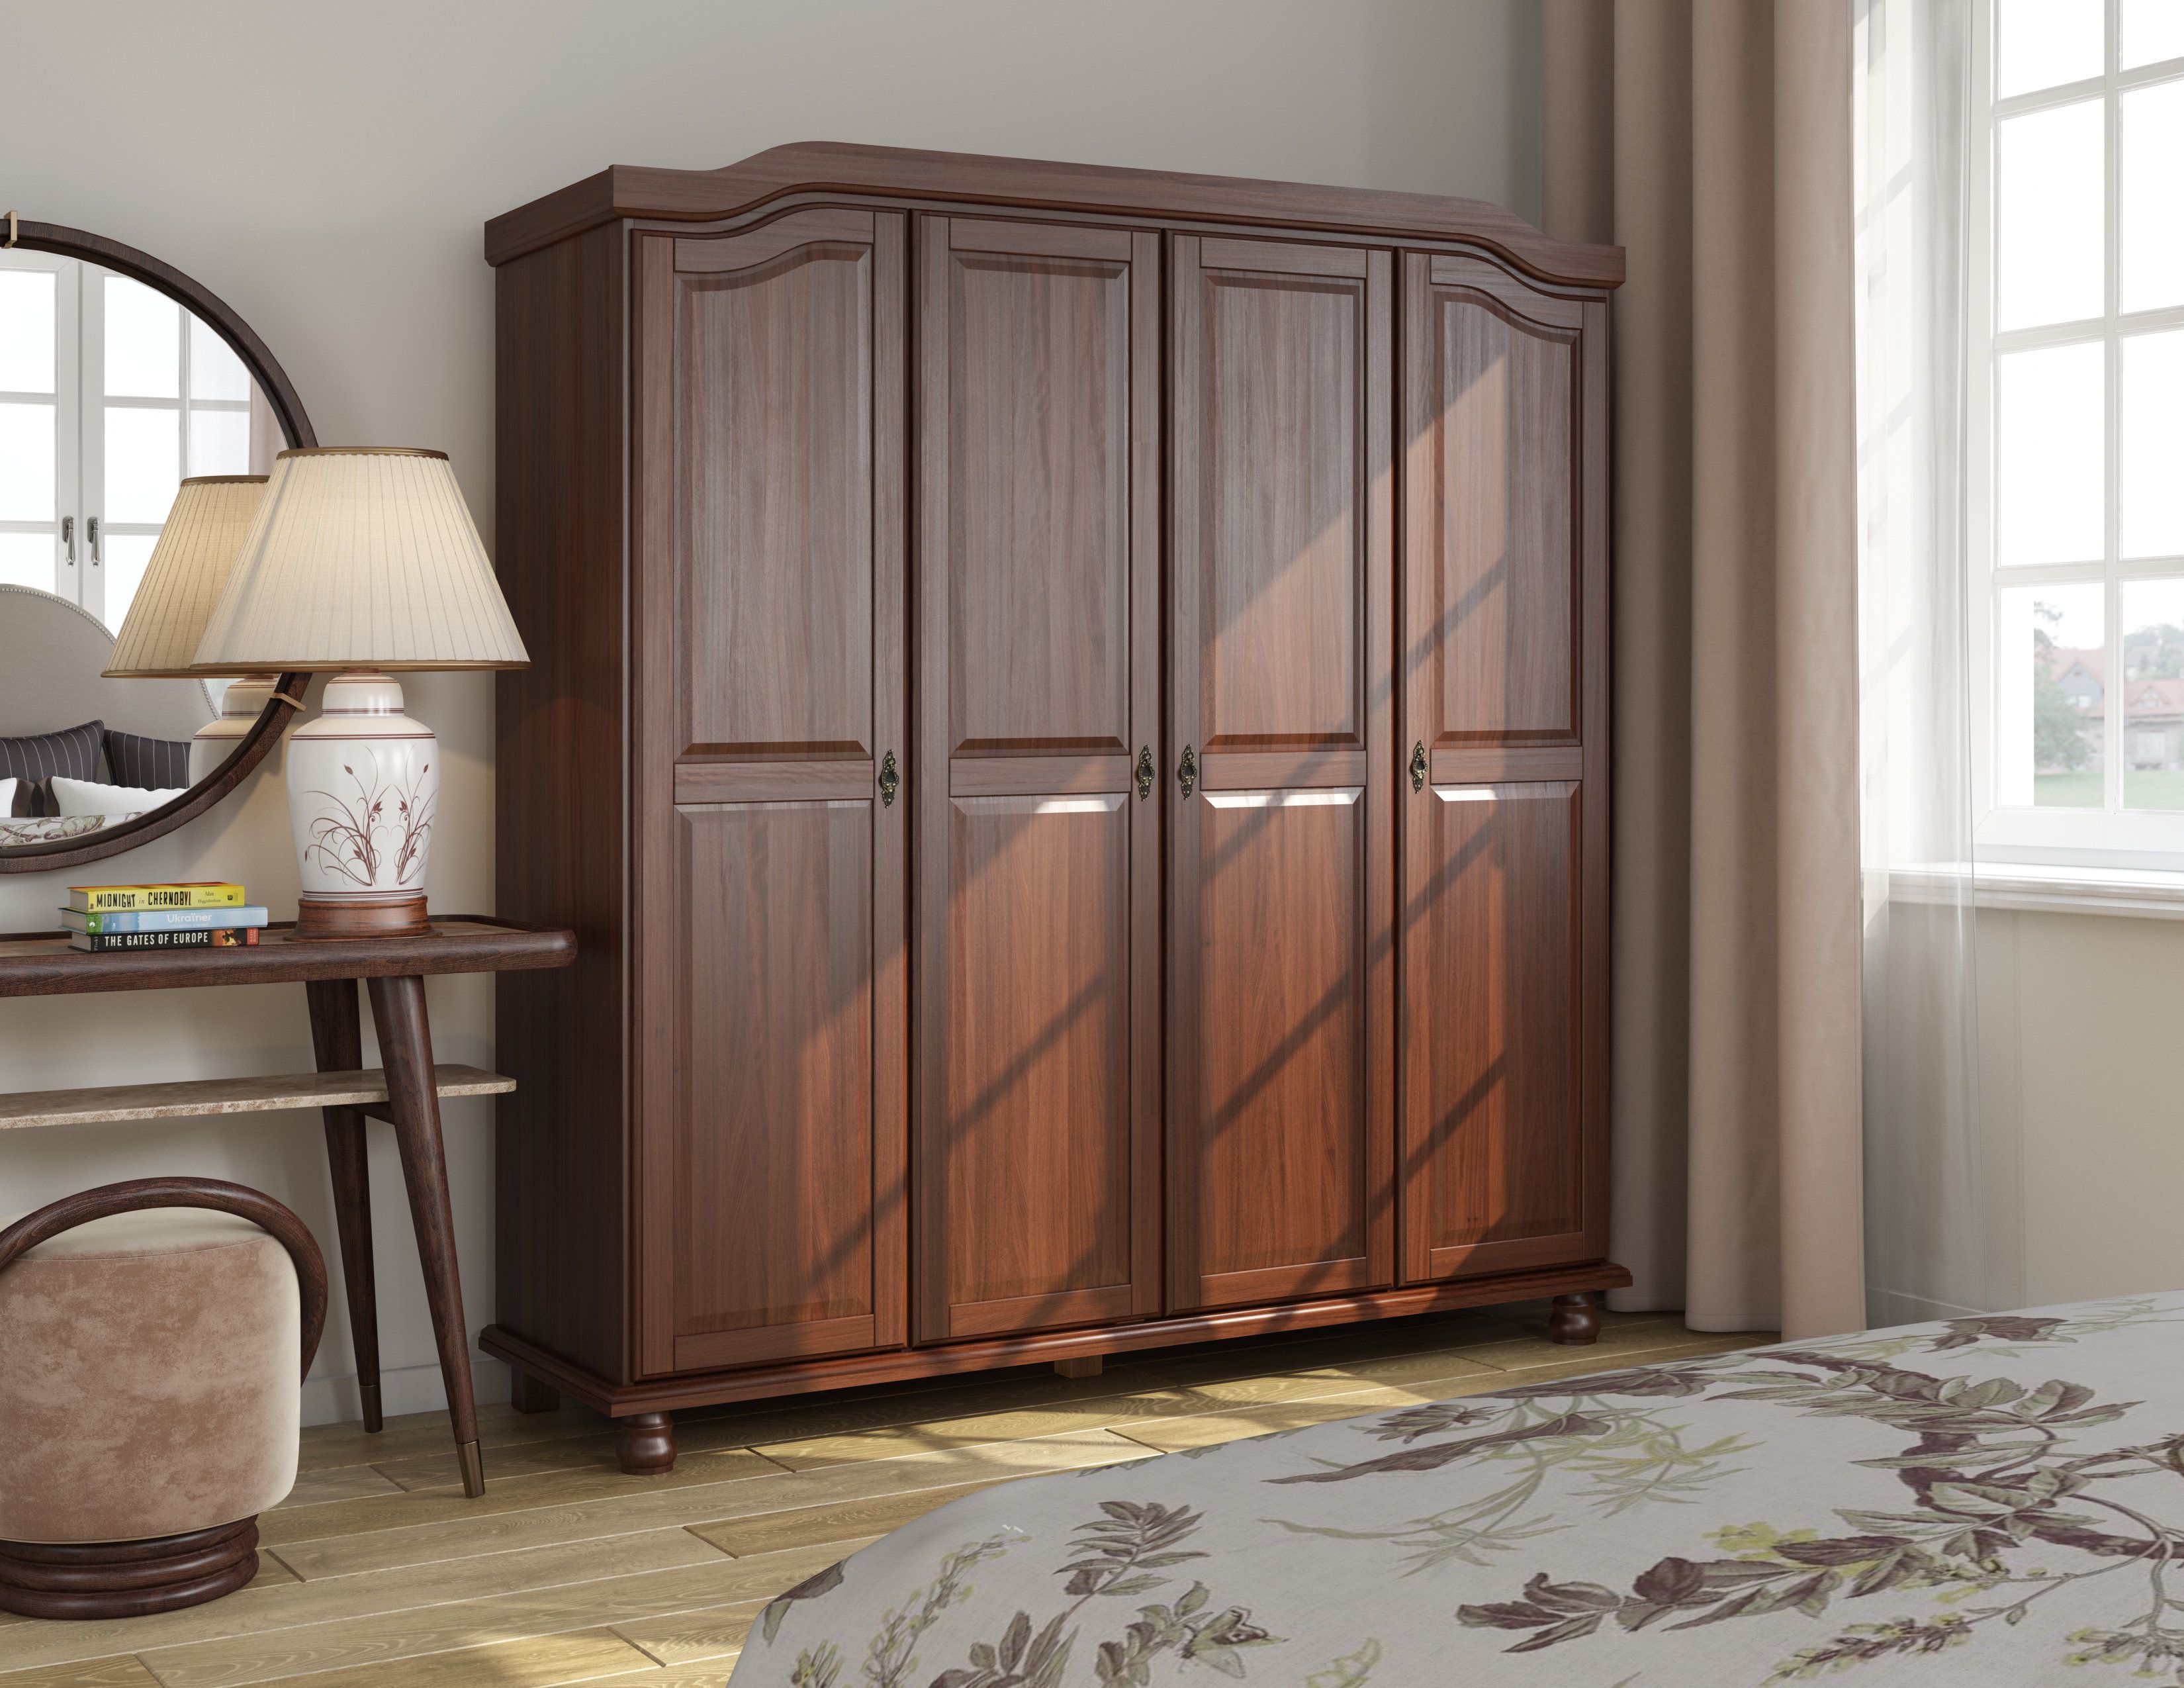 Charlton Home® Kyle 100% Solid Wood 4 Door Wardrobe Armoire & Reviews |  Wayfair With Regard To Solid Wood Wardrobes Closets (View 5 of 15)